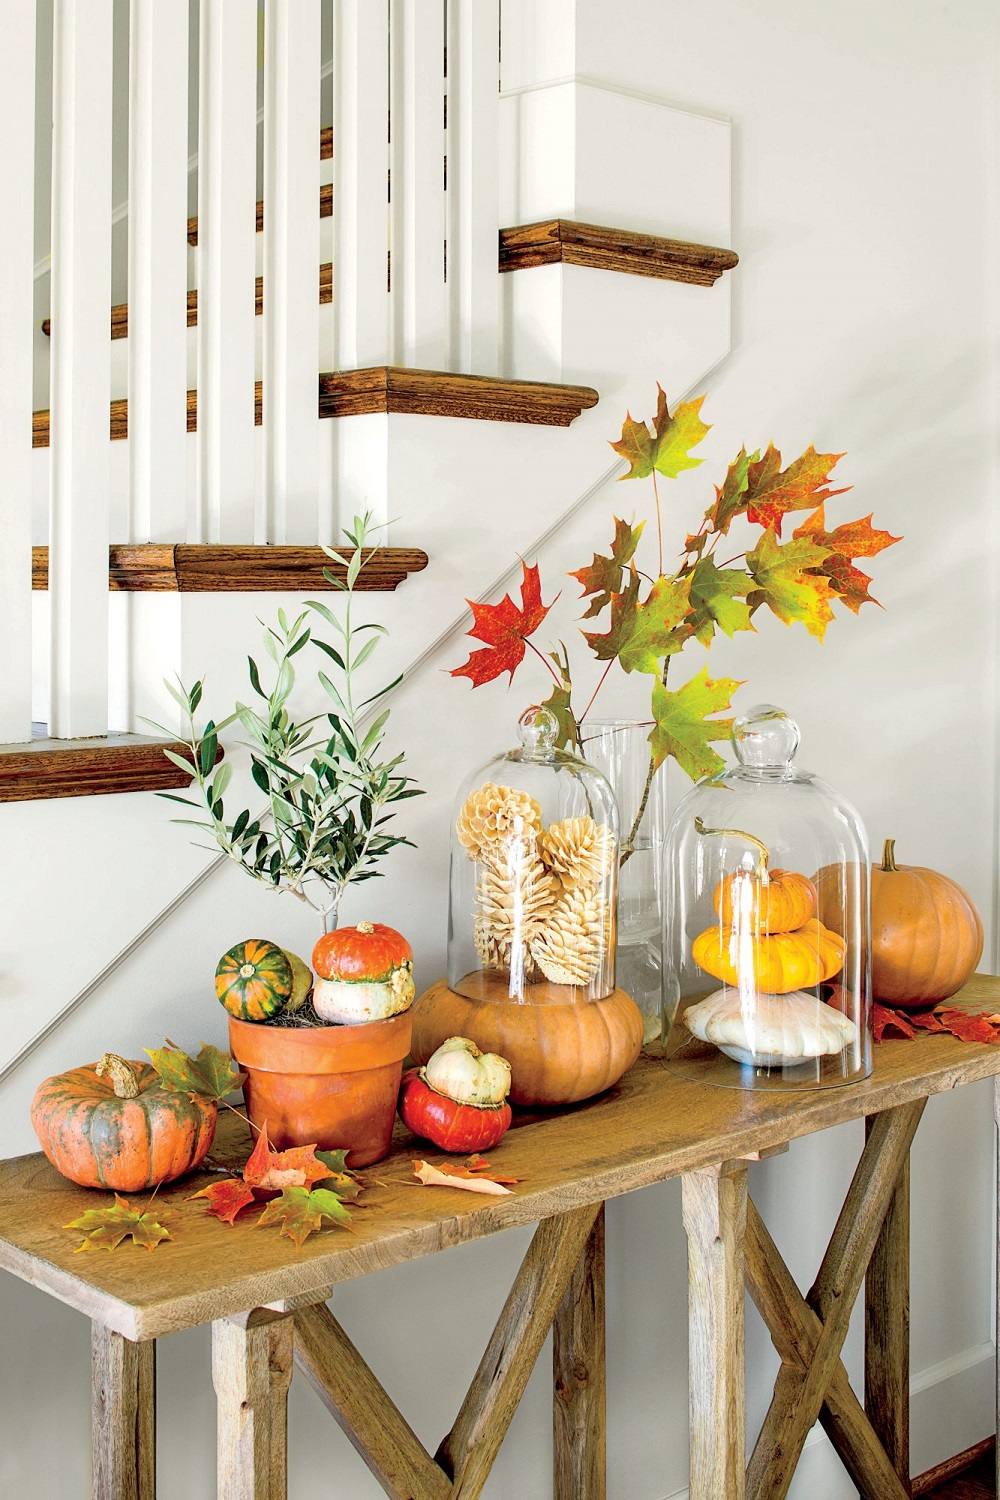 t3-74 Thanksgiving decorating ideas that will make your home look great